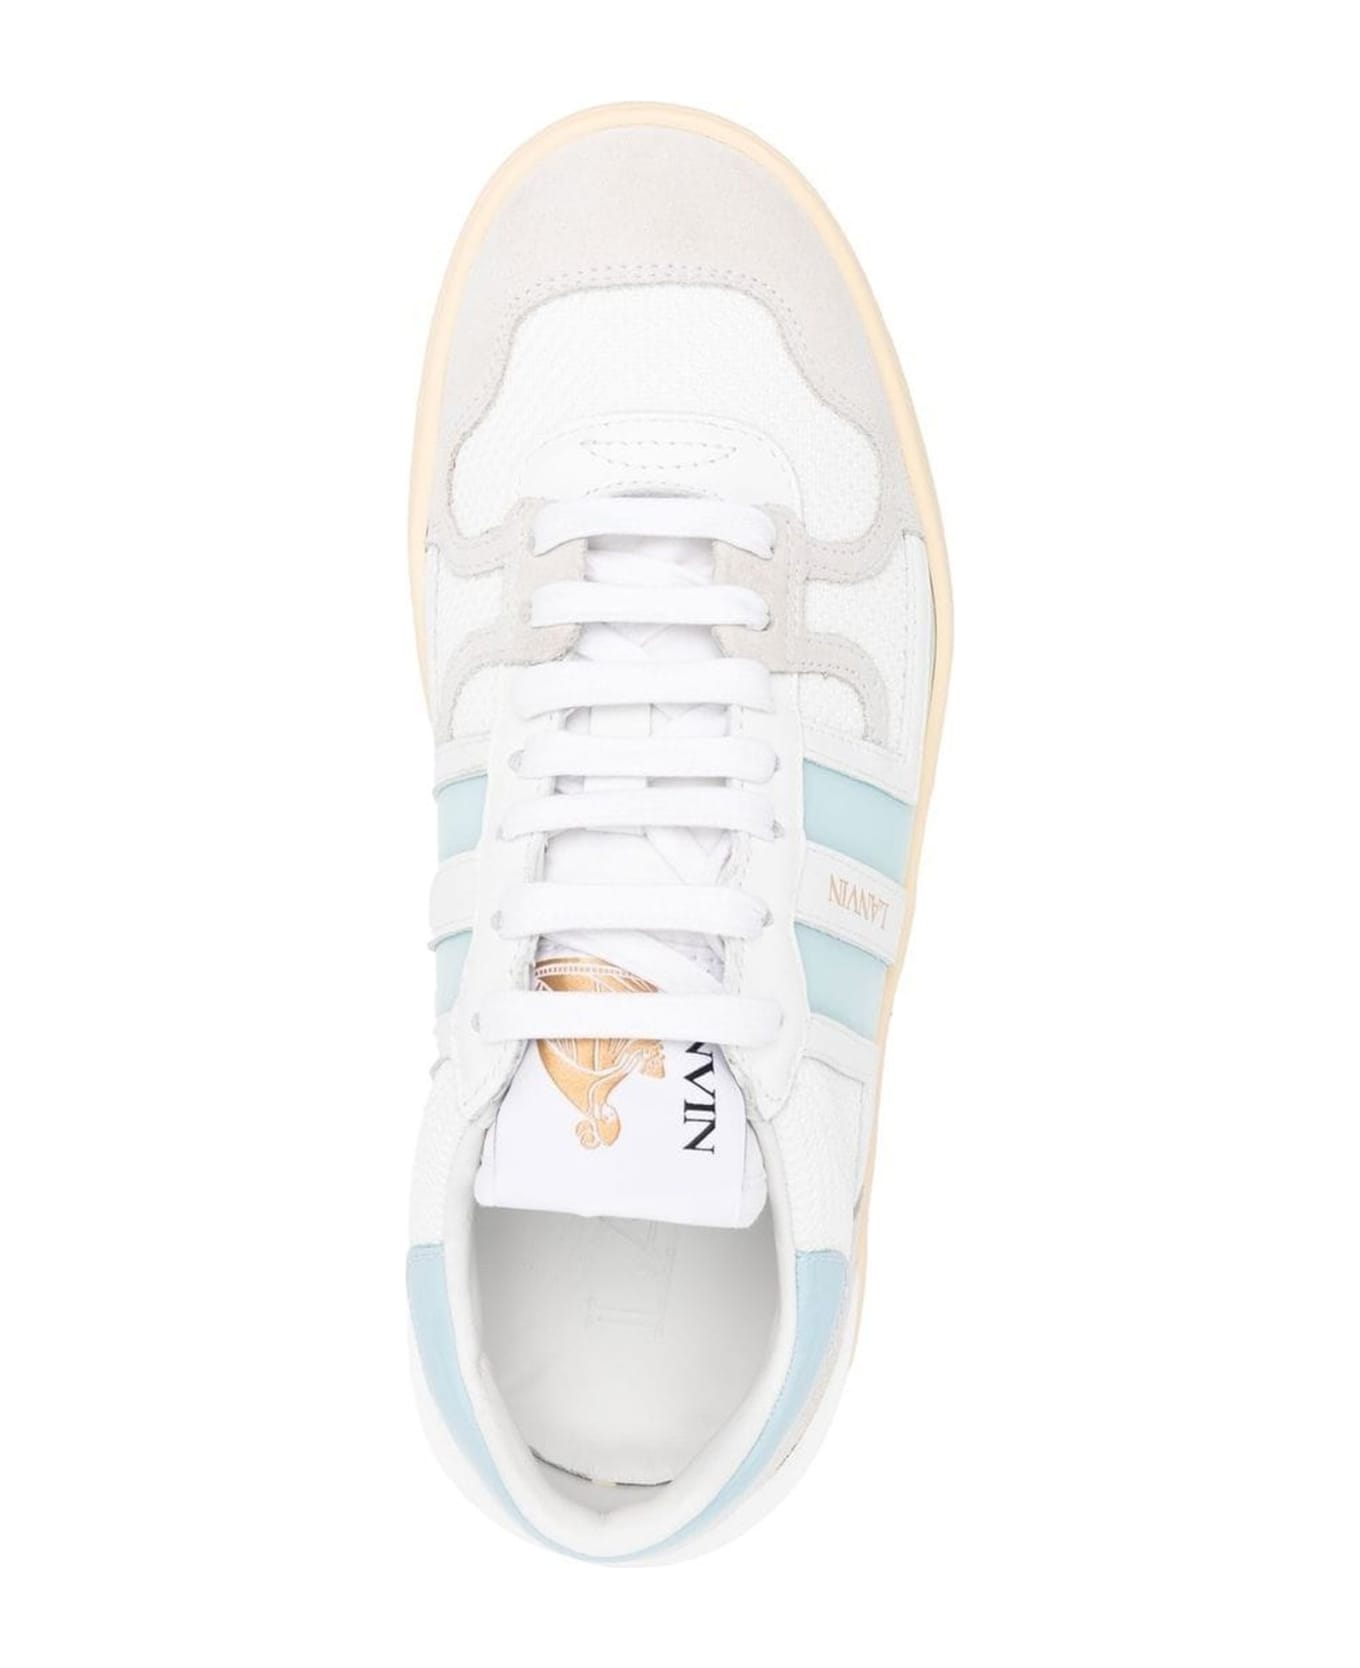 Lanvin White Calf Leather Clay Sneakers - Bianco